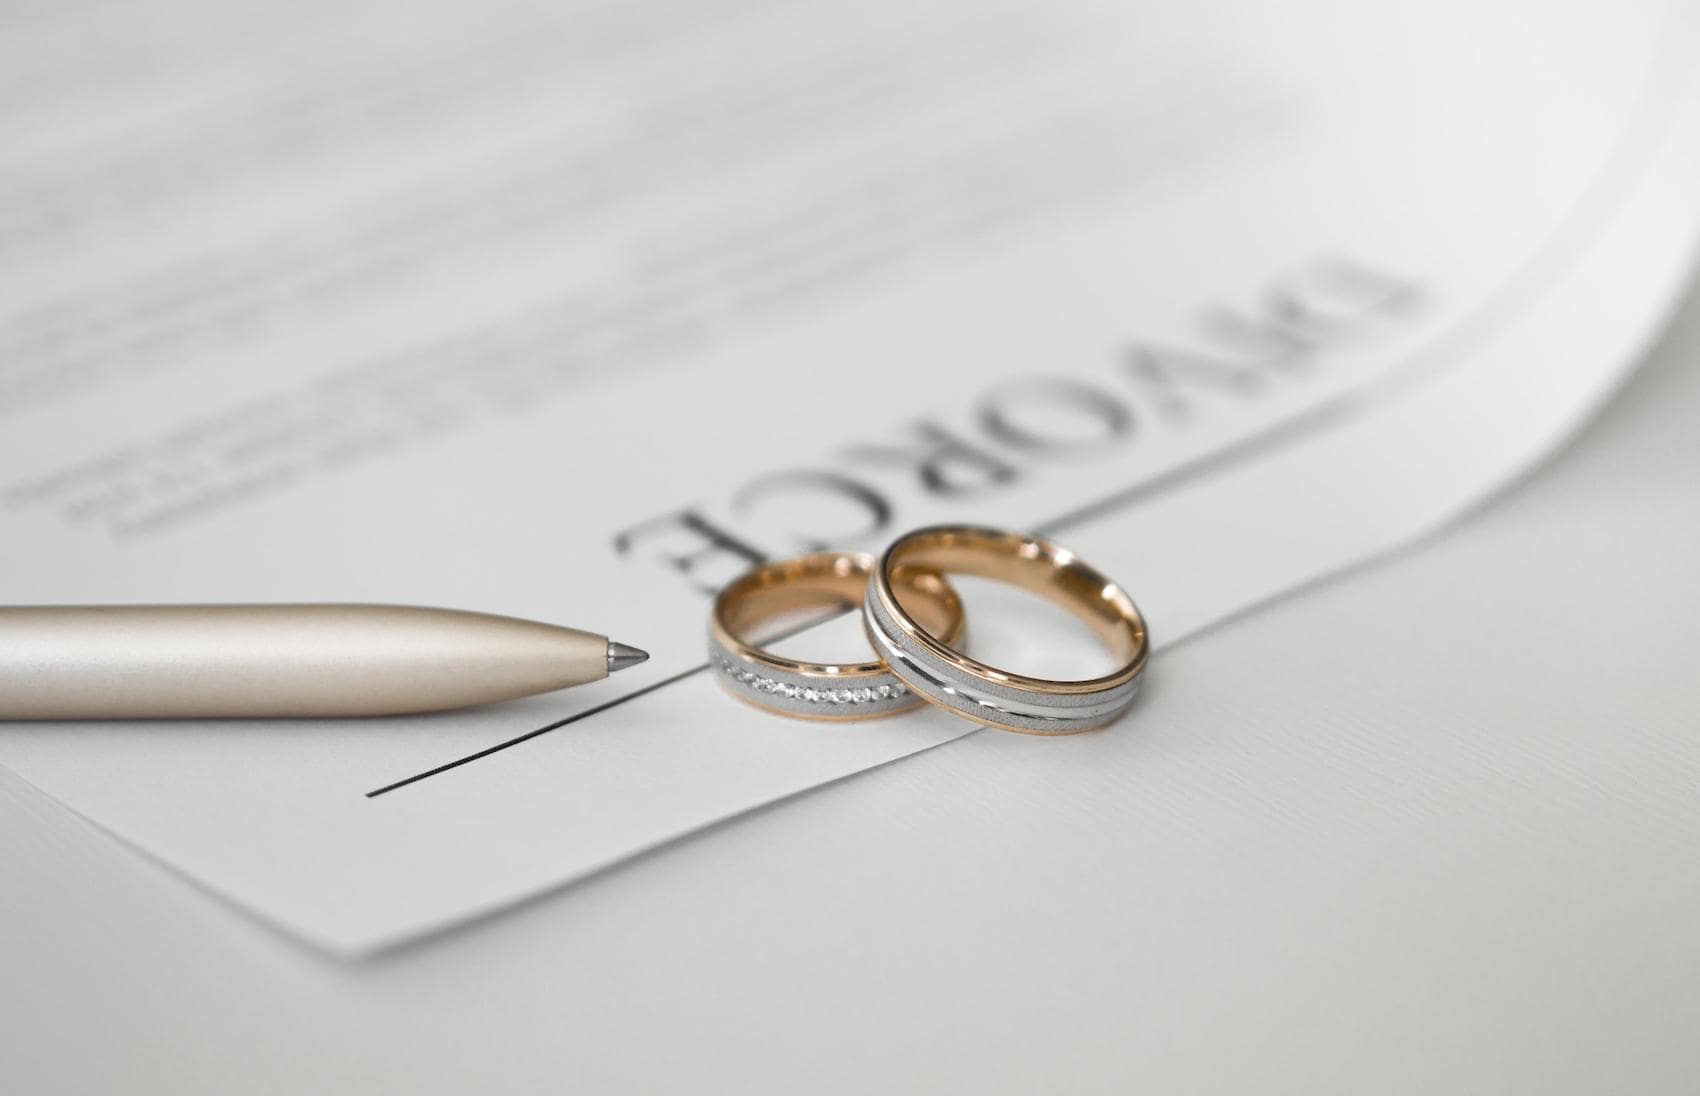 Featured Image for the article, "“Few couples applying for joint divorce, HMCTS figures reveal”"